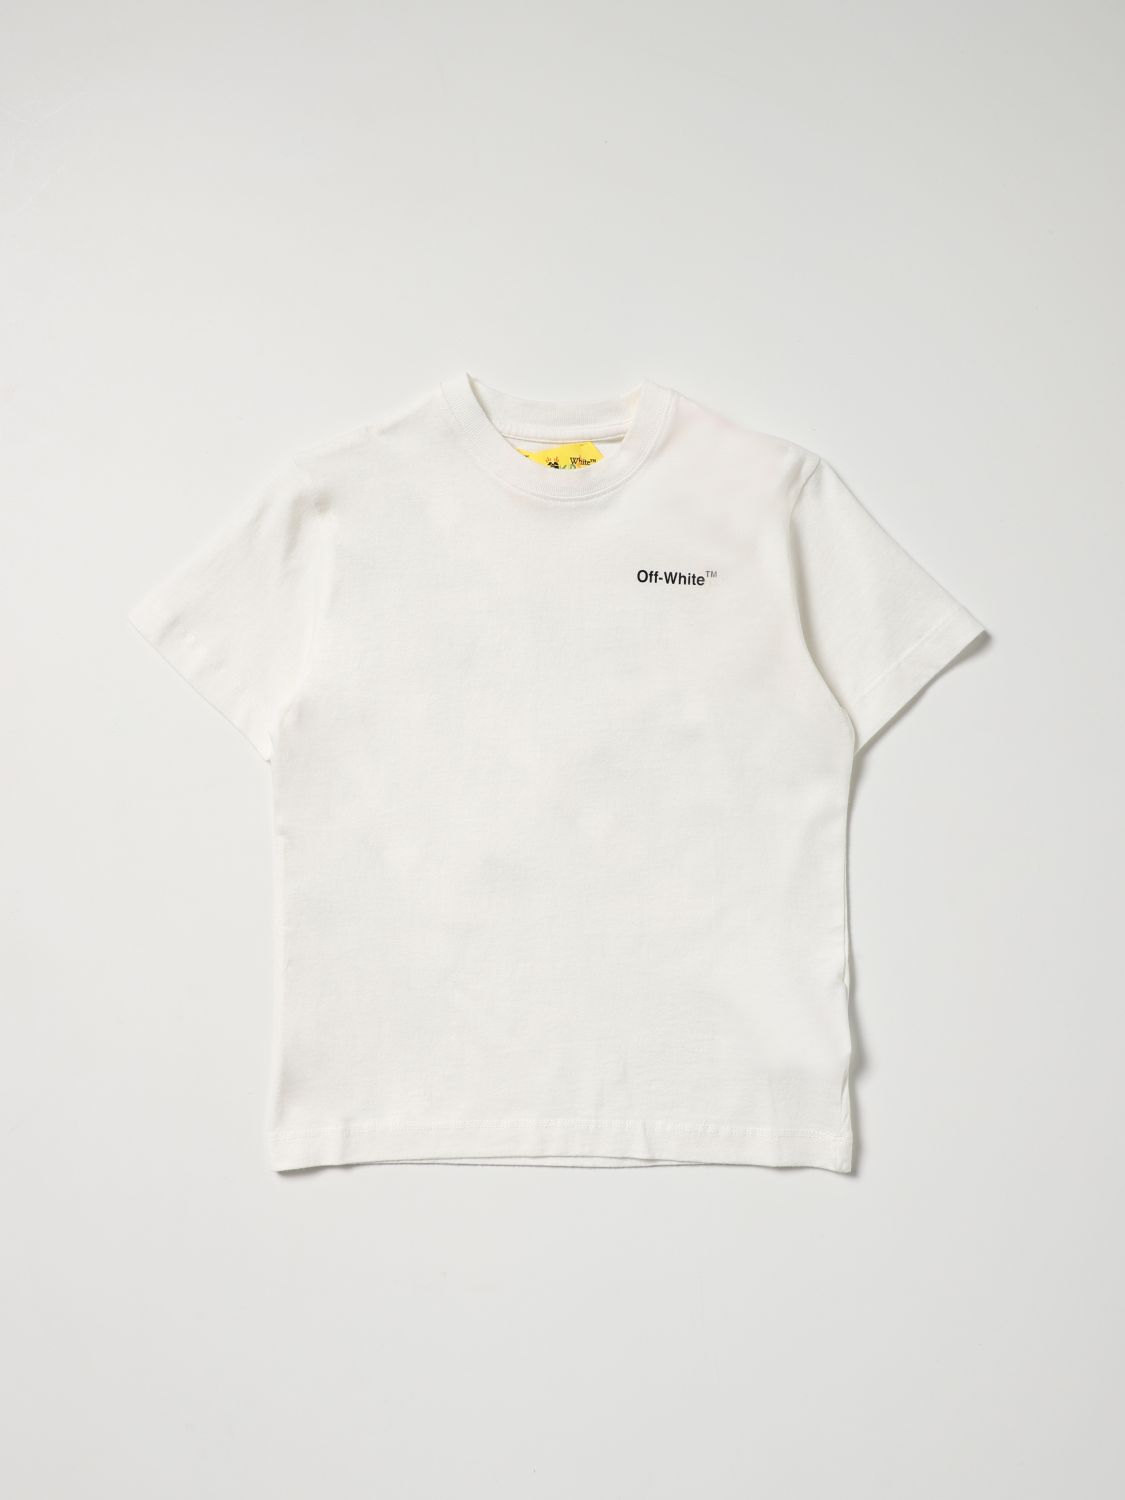 OFF-WHITE T-SHIRT WITH PRINTED LOGO,359344001